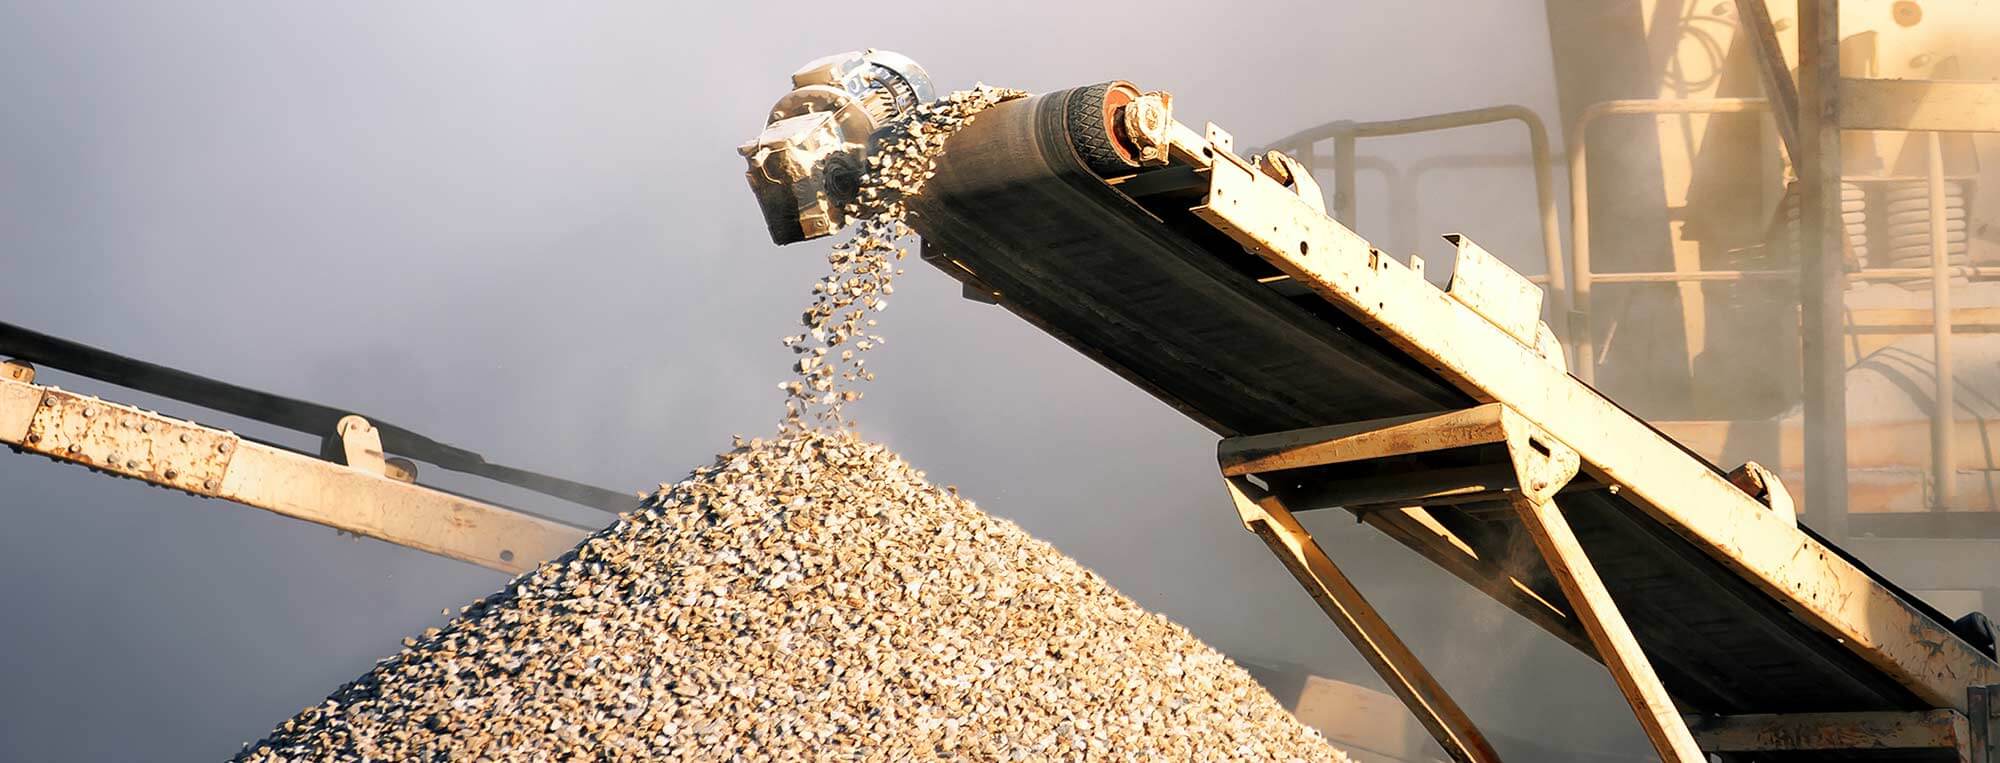 Solutions for Cement Industry | RINGFEDER®